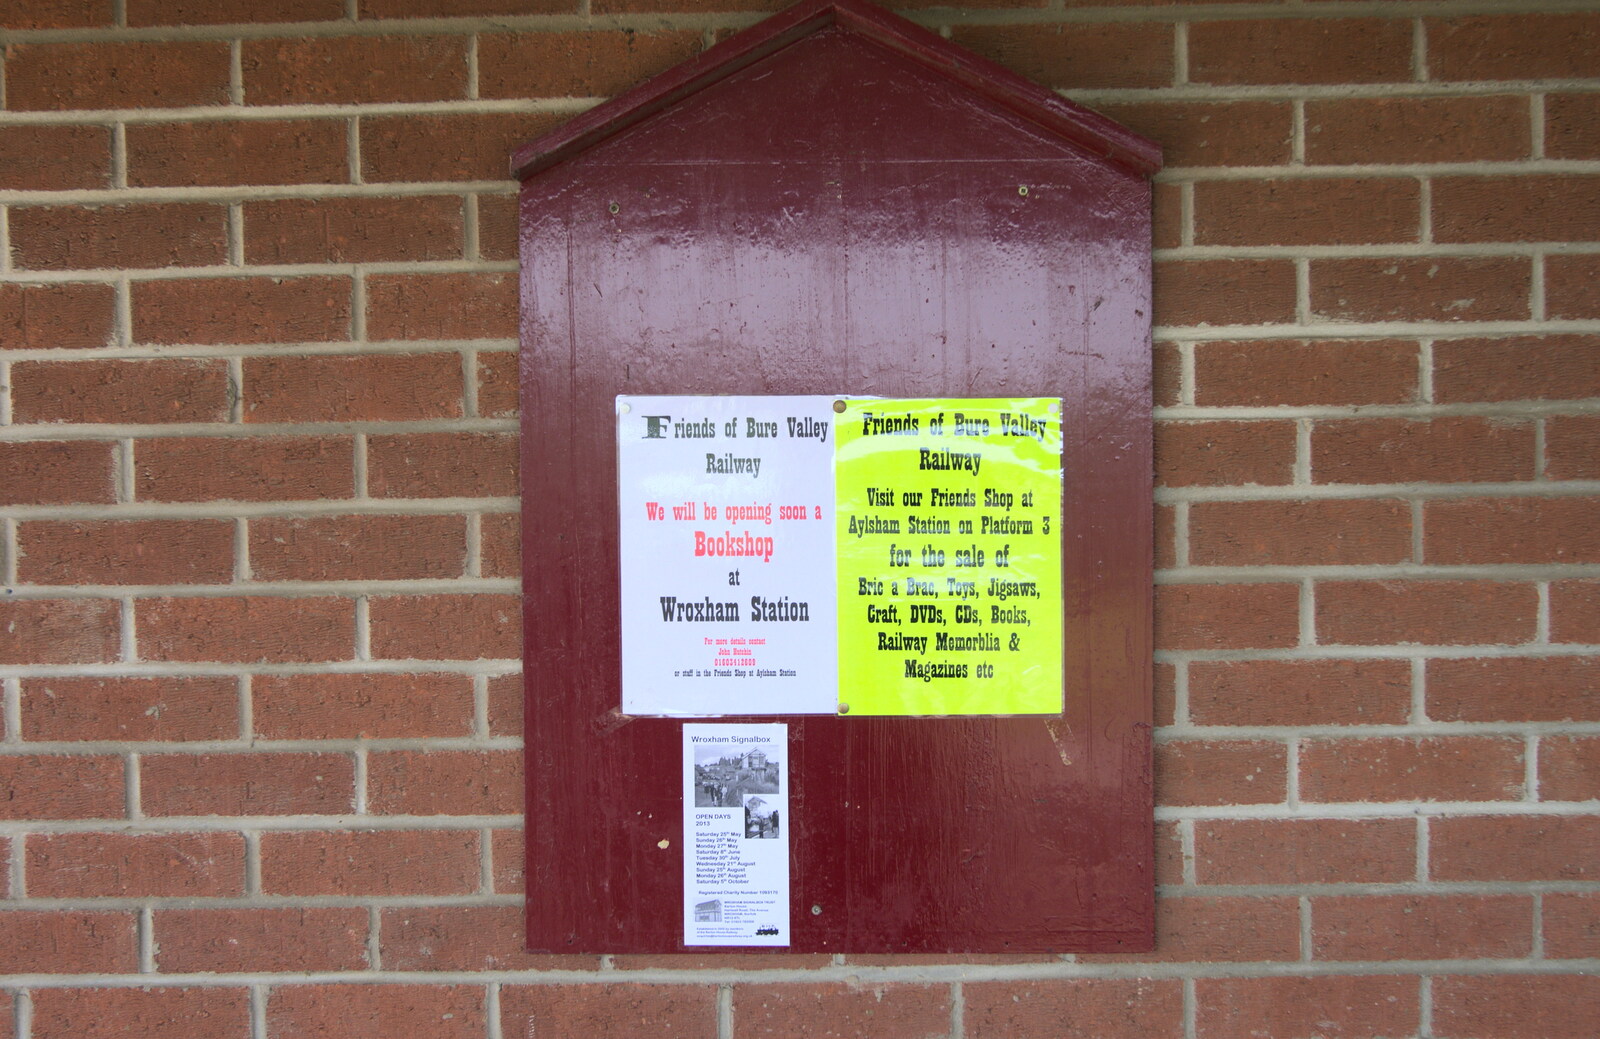 A noticeboard from The Bure Valley Railway, Aylsham, Norfolk - 26th May 2013